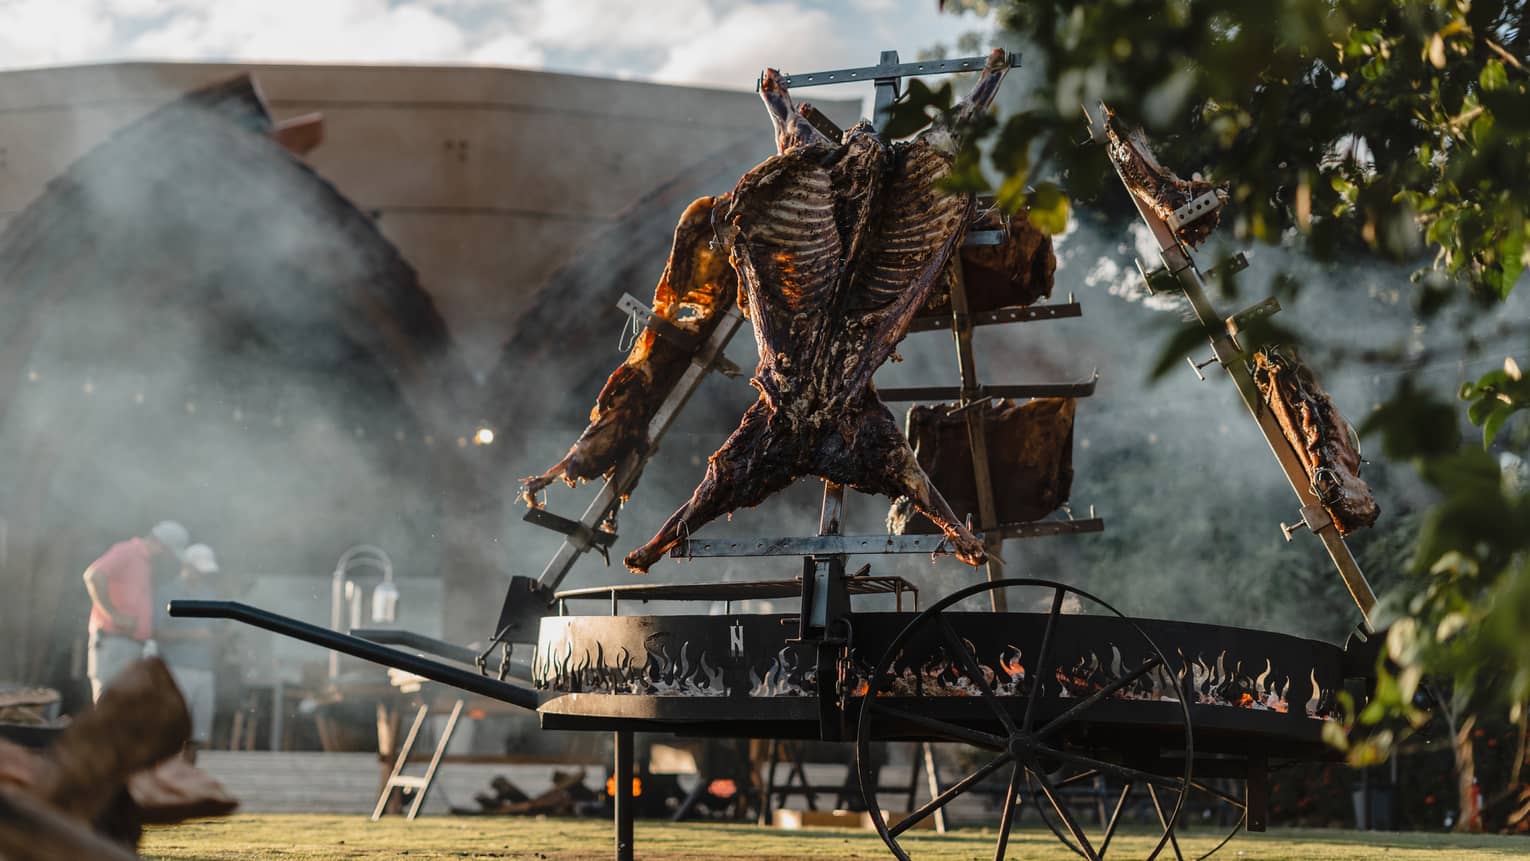 Six large piece of beef hang above a large outdoor asado grill as smoke billows in the distance